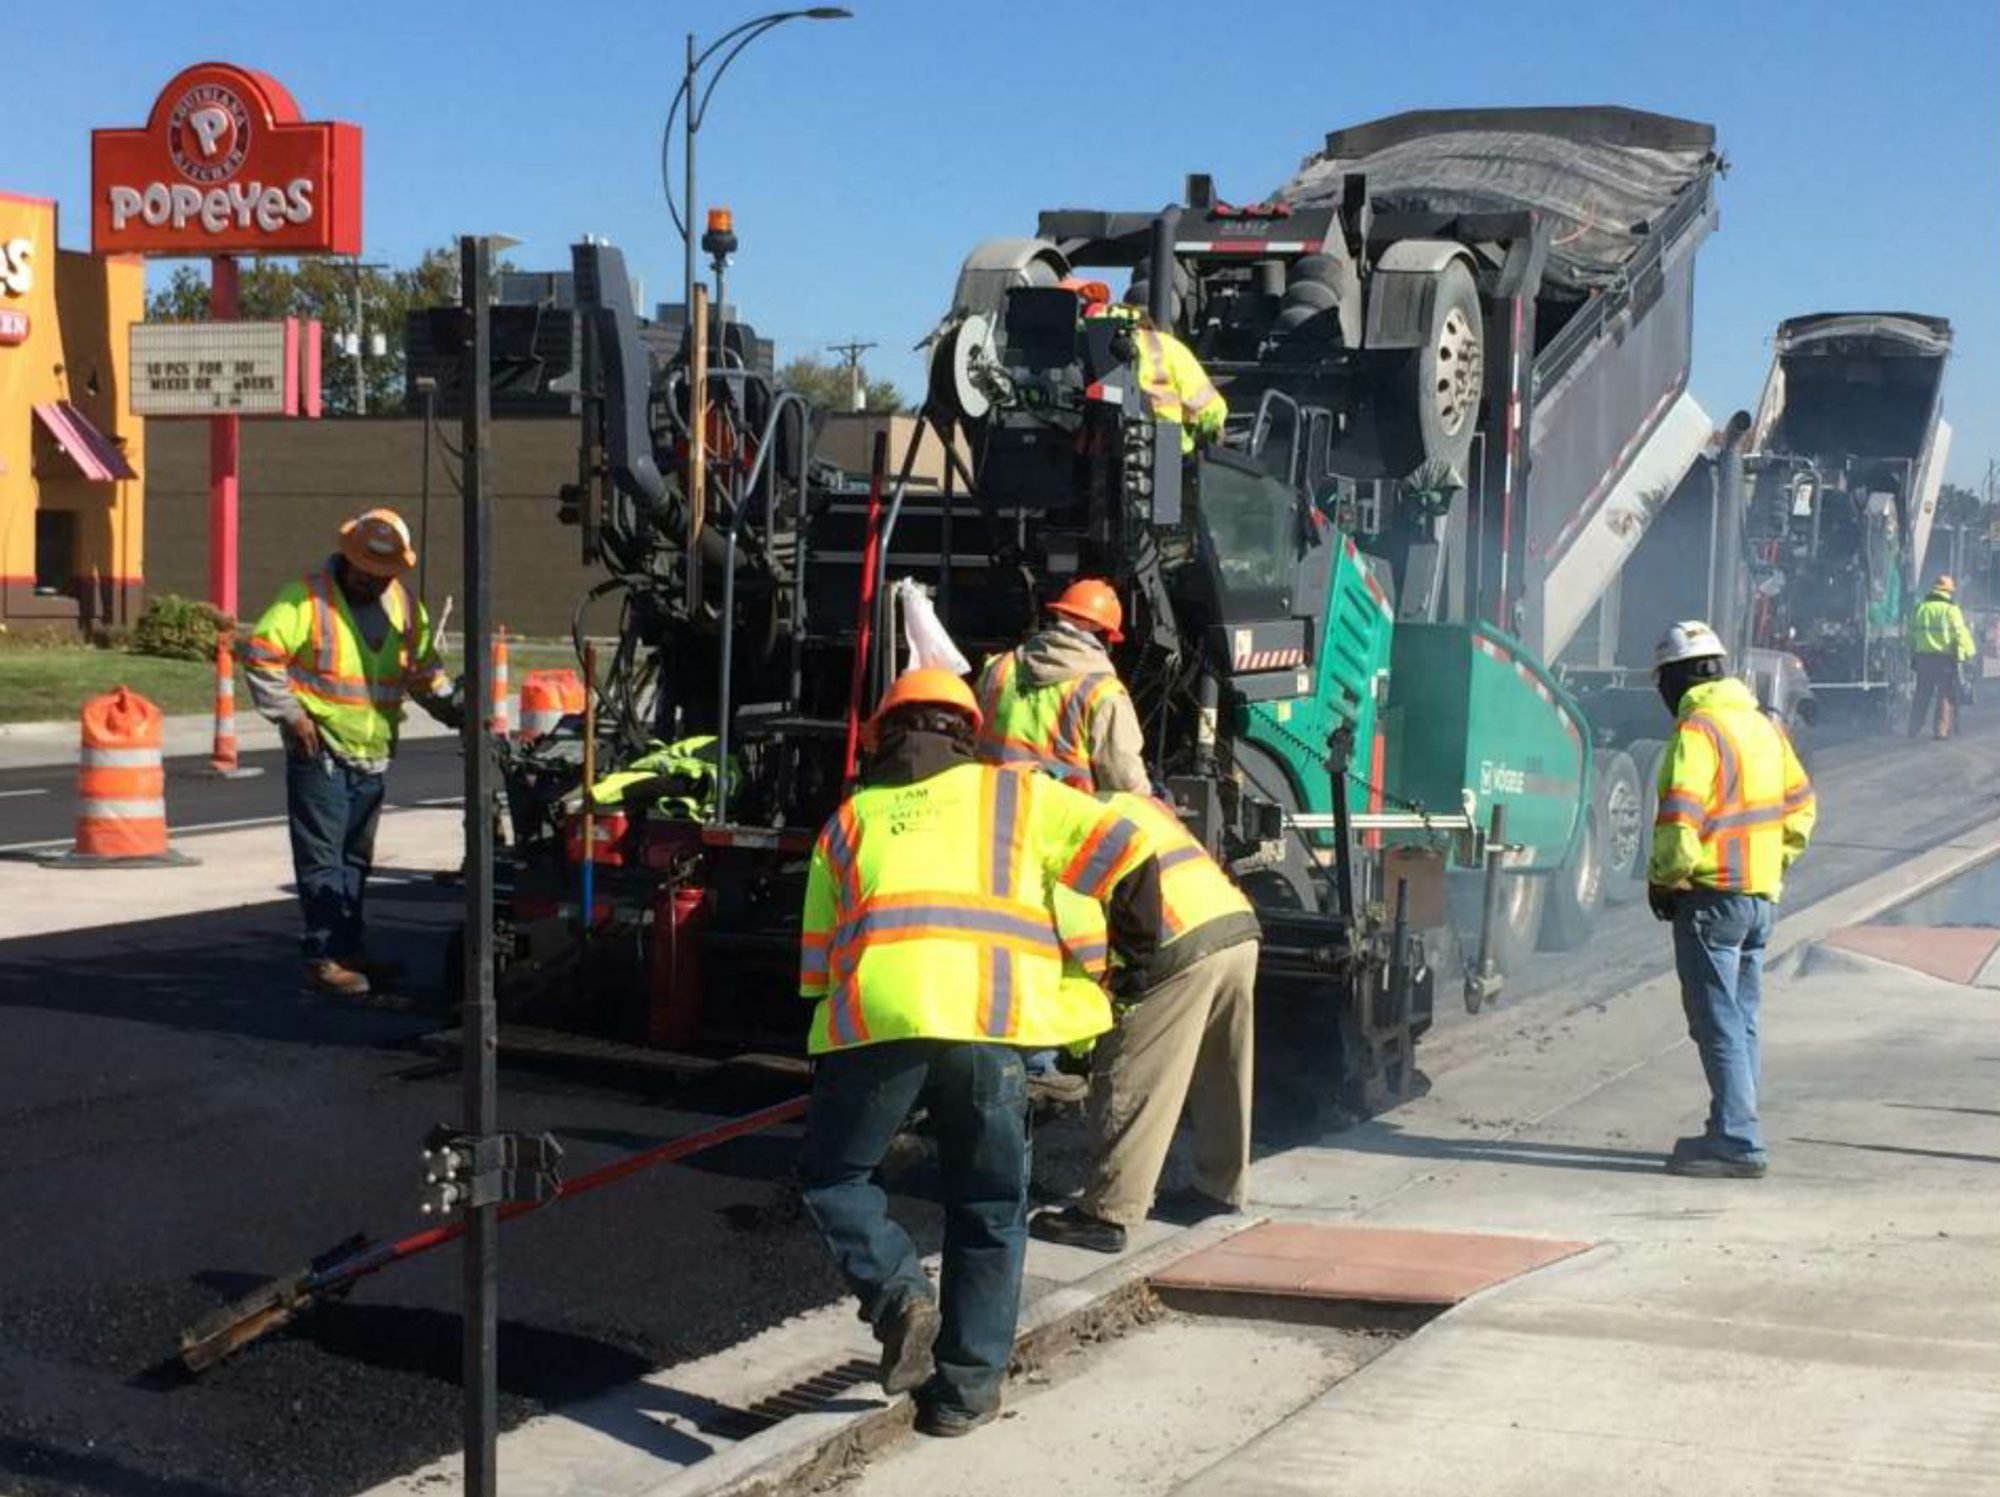 Paving 101: What You Should Know About Asphalt Paving - Perrin Construction